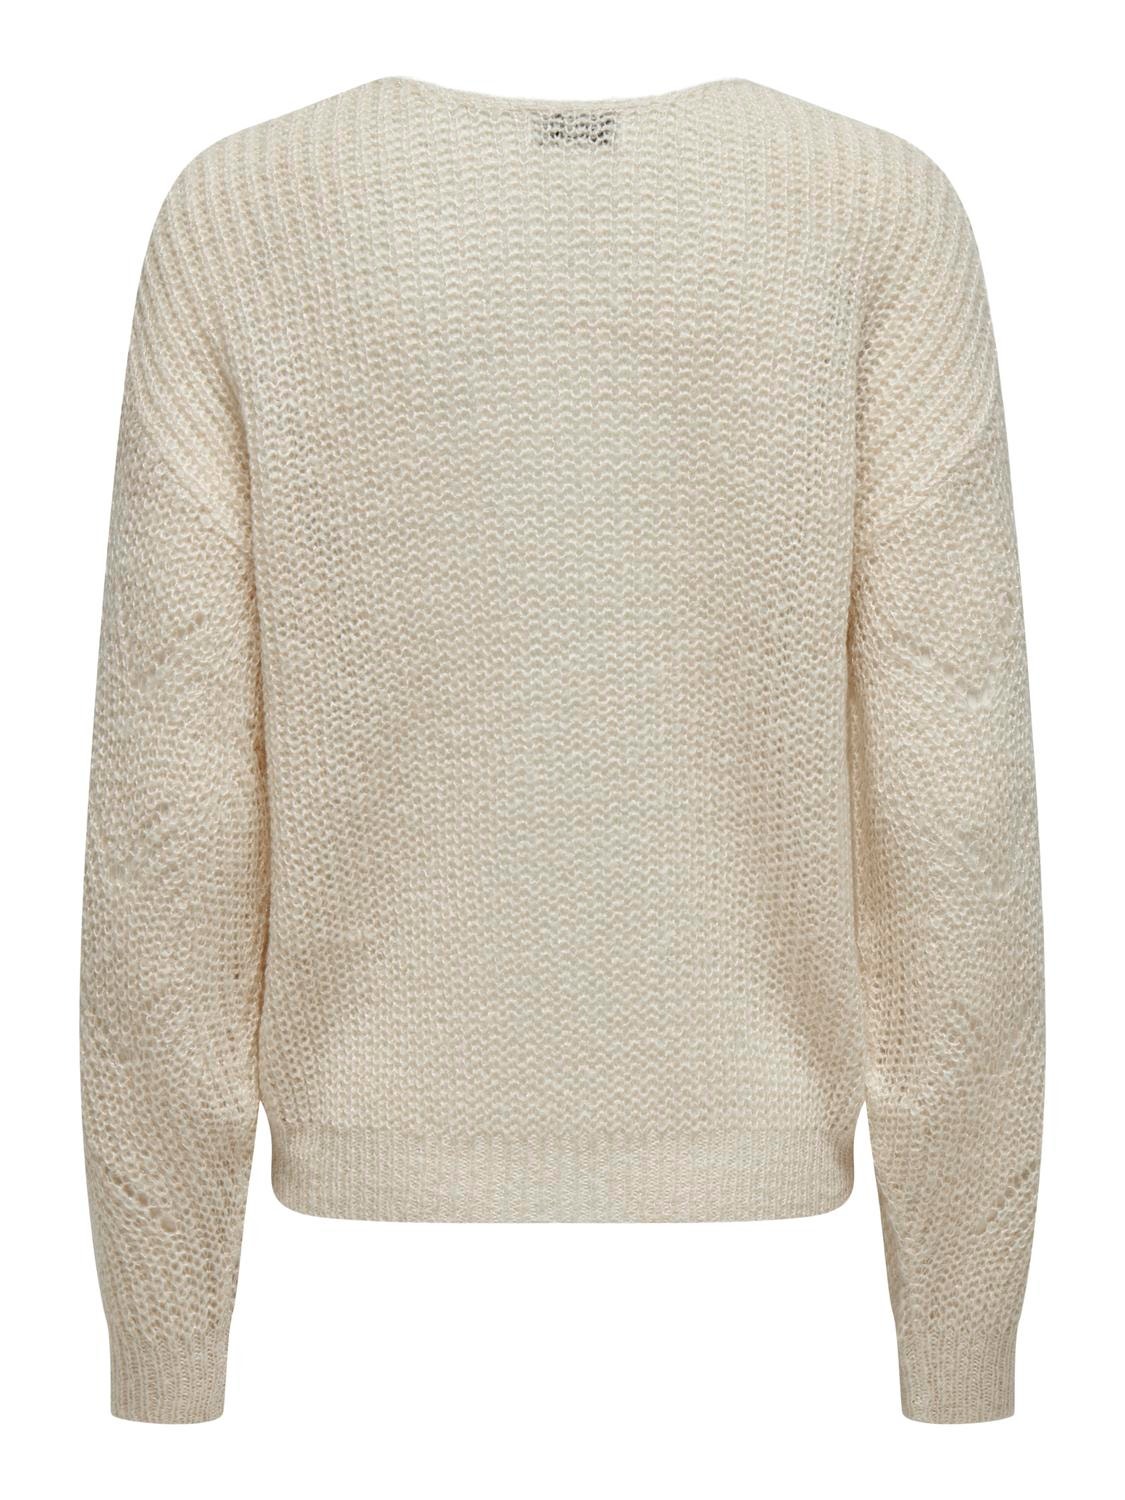 ONLY Pullover Scollo a V Spalle cadenti -Sandshell - 15302387